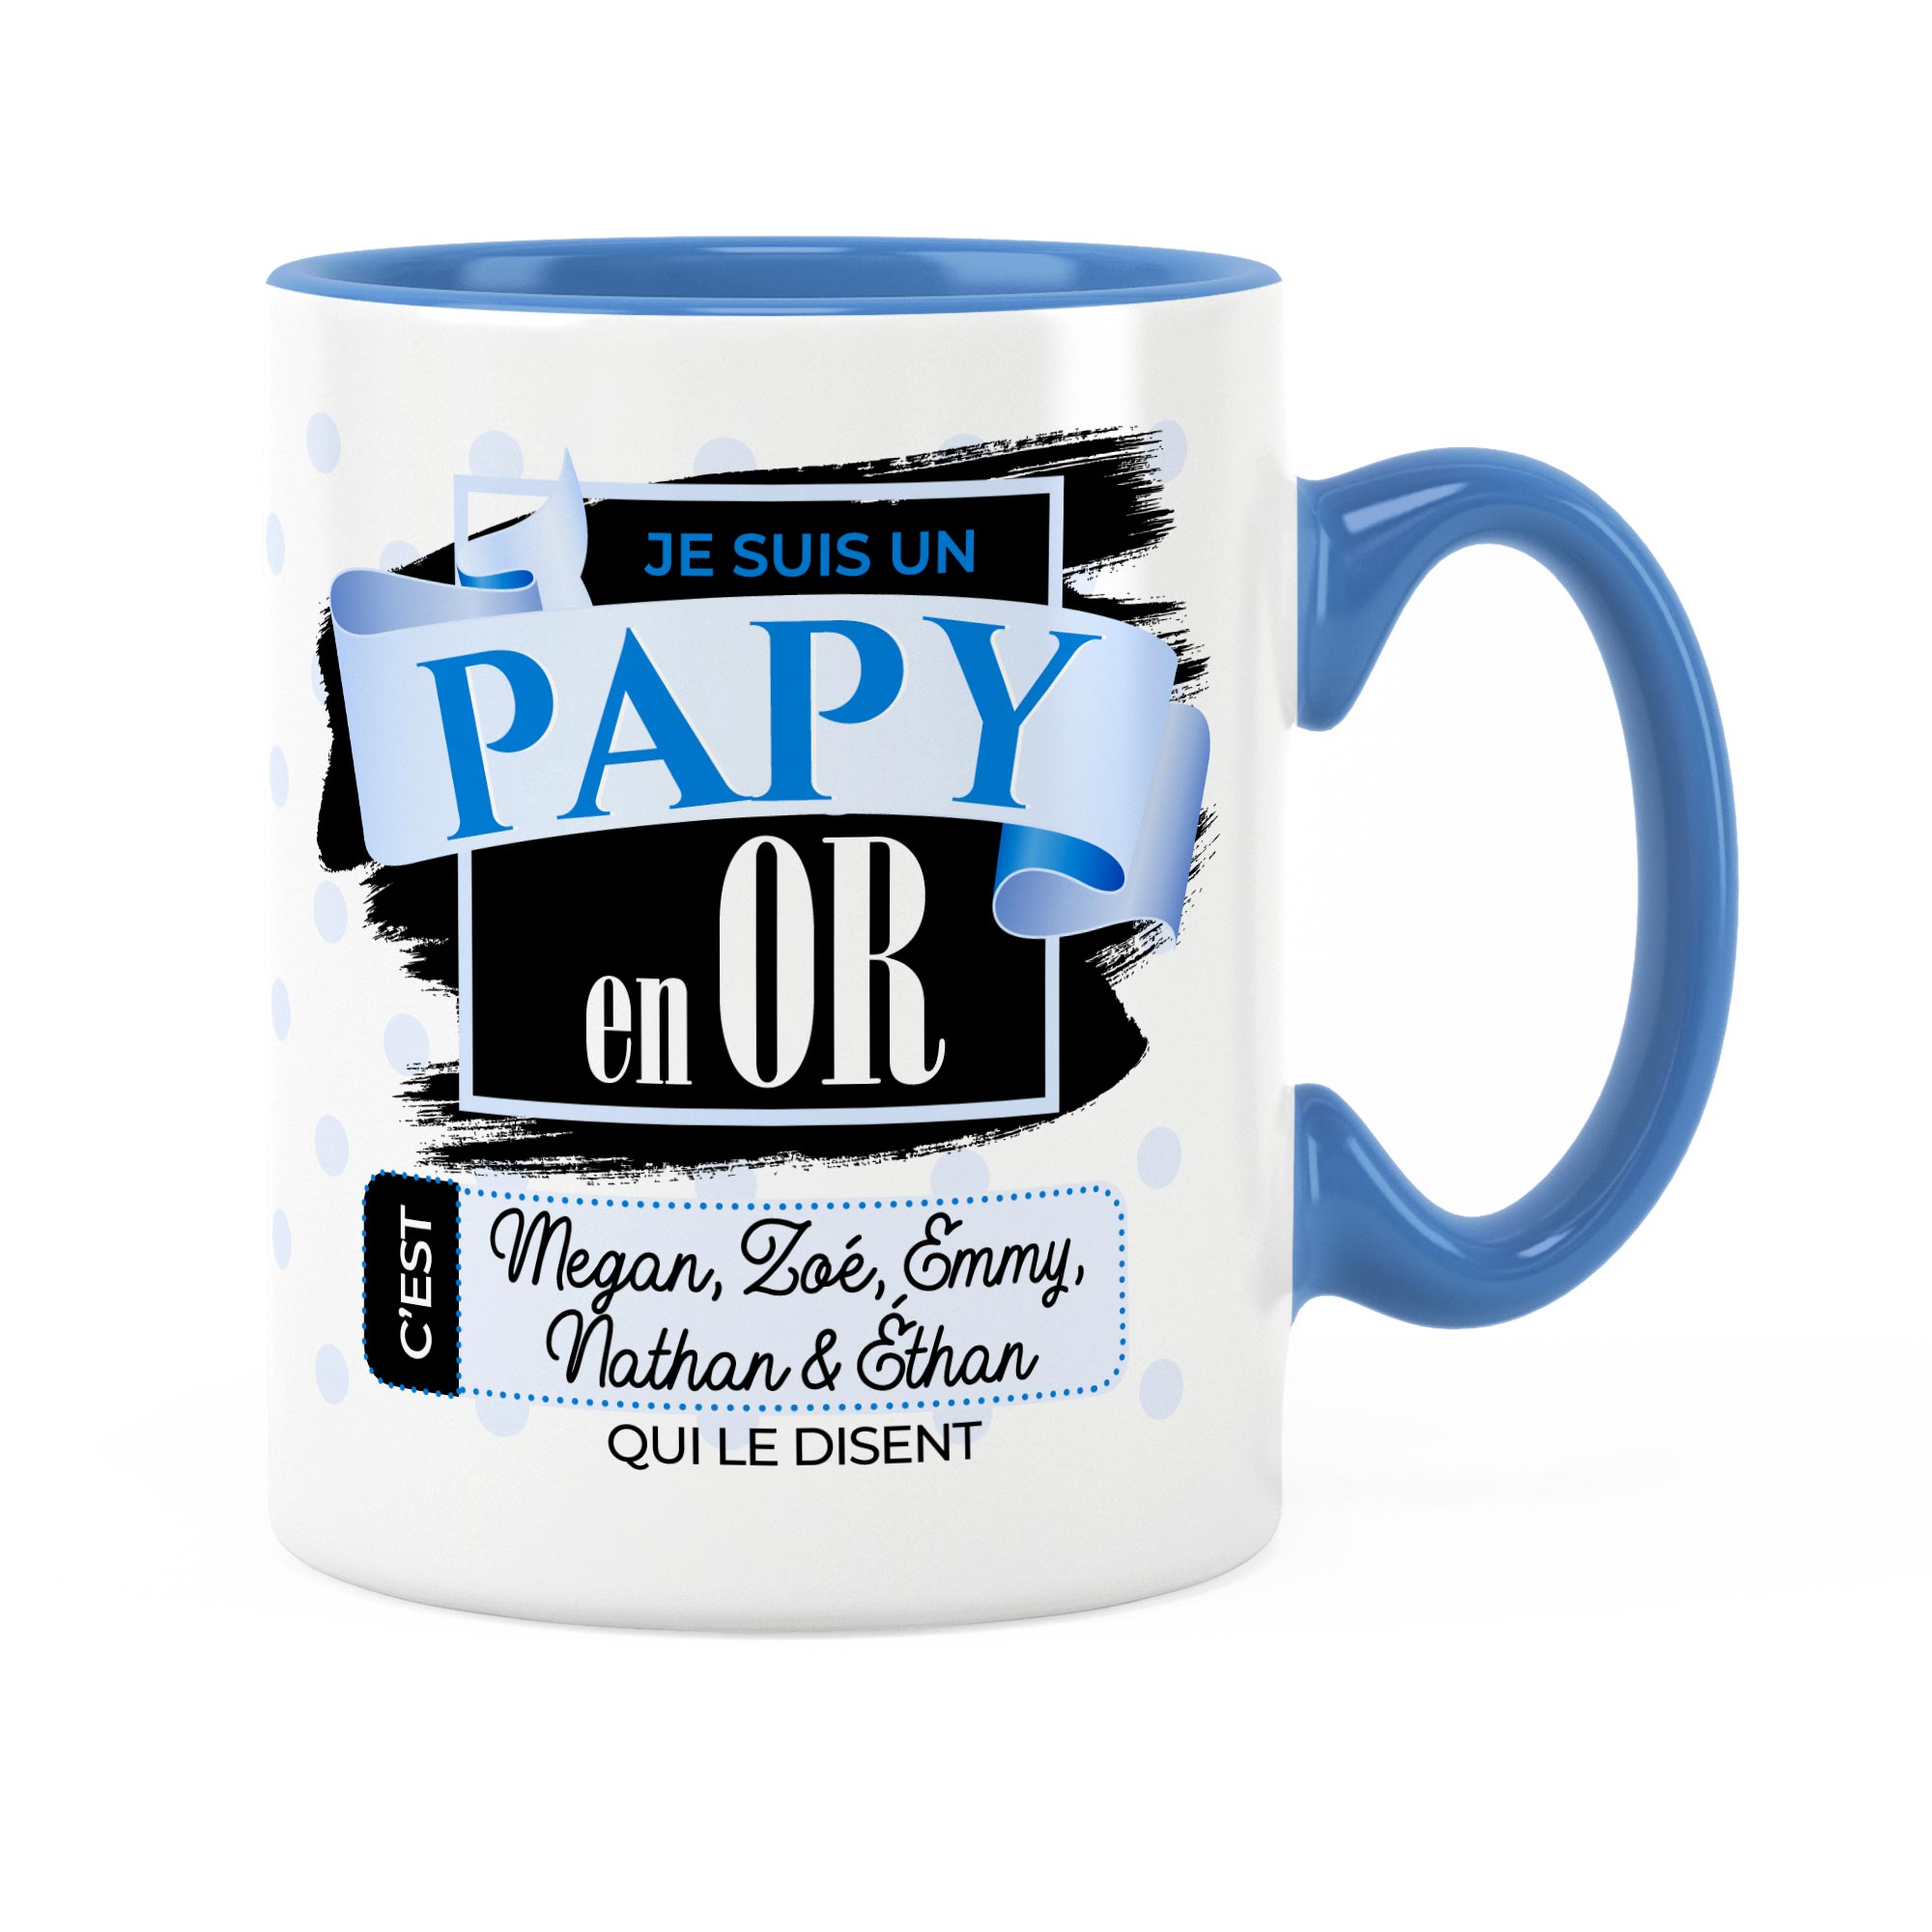 https://www.capitainemoutarde.fr/wp-content/uploads/2020/10/cadeau-noel-papy-mug-a-personnaliser-prenom-capitaine-moutarde-11-0.jpg